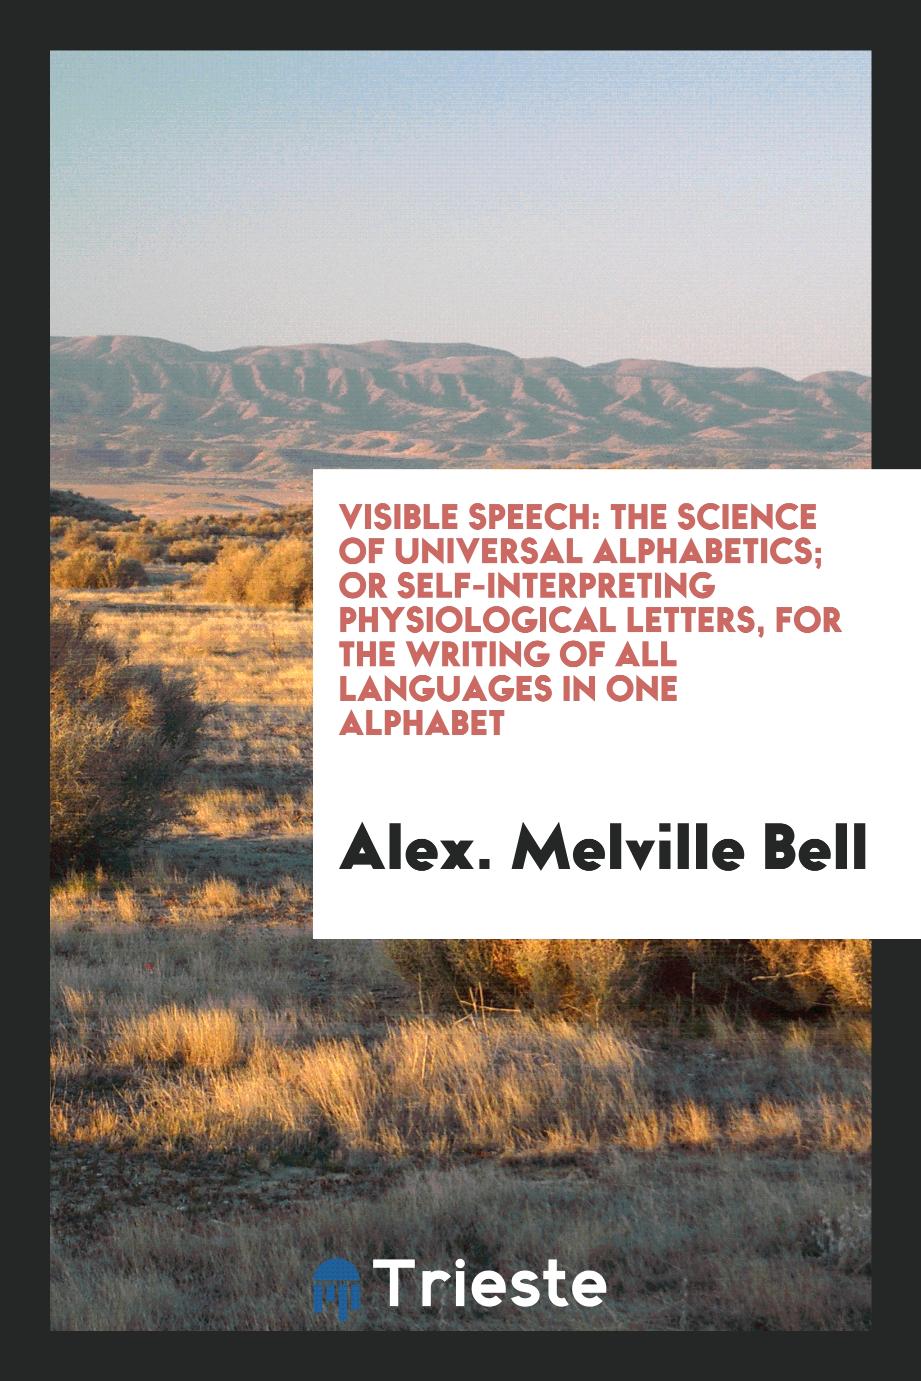 Visible Speech: The Science of Universal Alphabetics; Or Self-Interpreting Physiological Letters, for the Writing of All Languages in One Alphabet